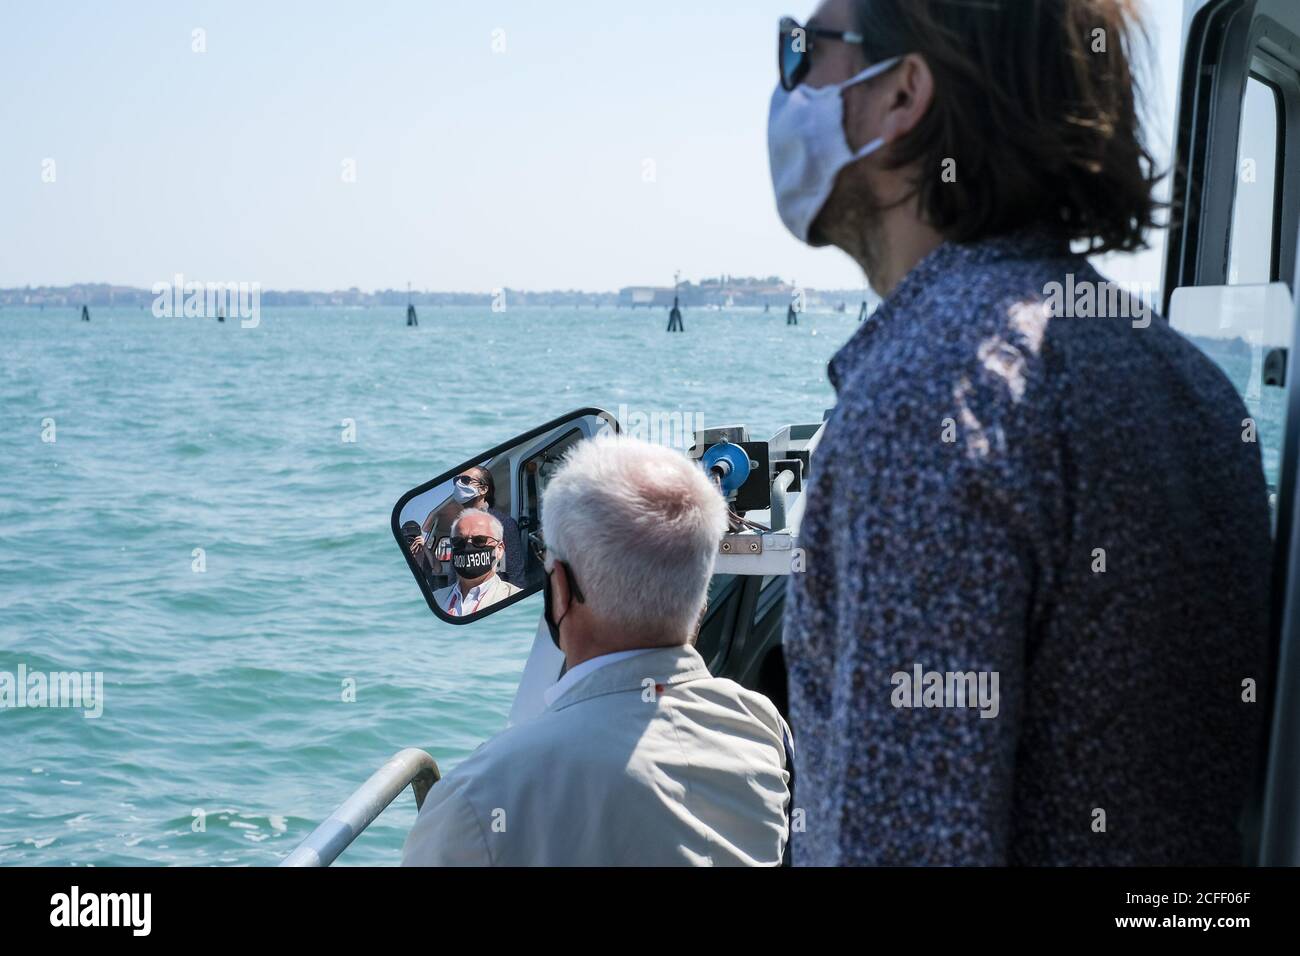 Atmosphere around Venice on Saturday 5 September 2020 at , Venice. Wearing face coverings on water (public) transport due to Covid-19. Picture by Julie Edwards. Stock Photo